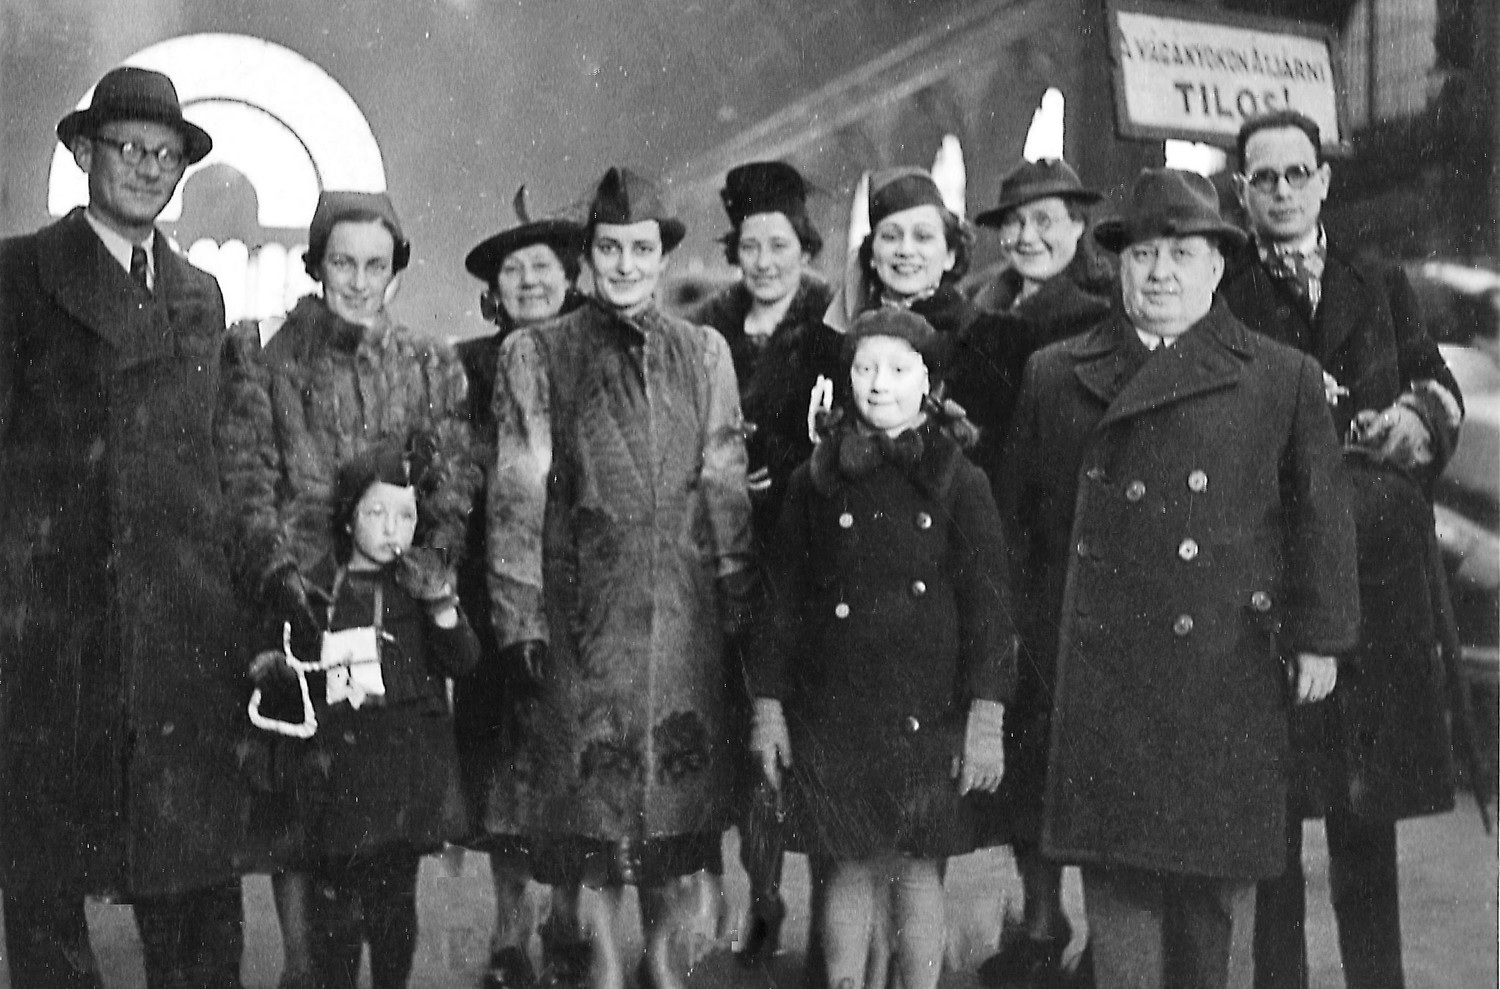 A Jewish family reunited in Budapest in 1943 following the arrival there of family members from Holland.